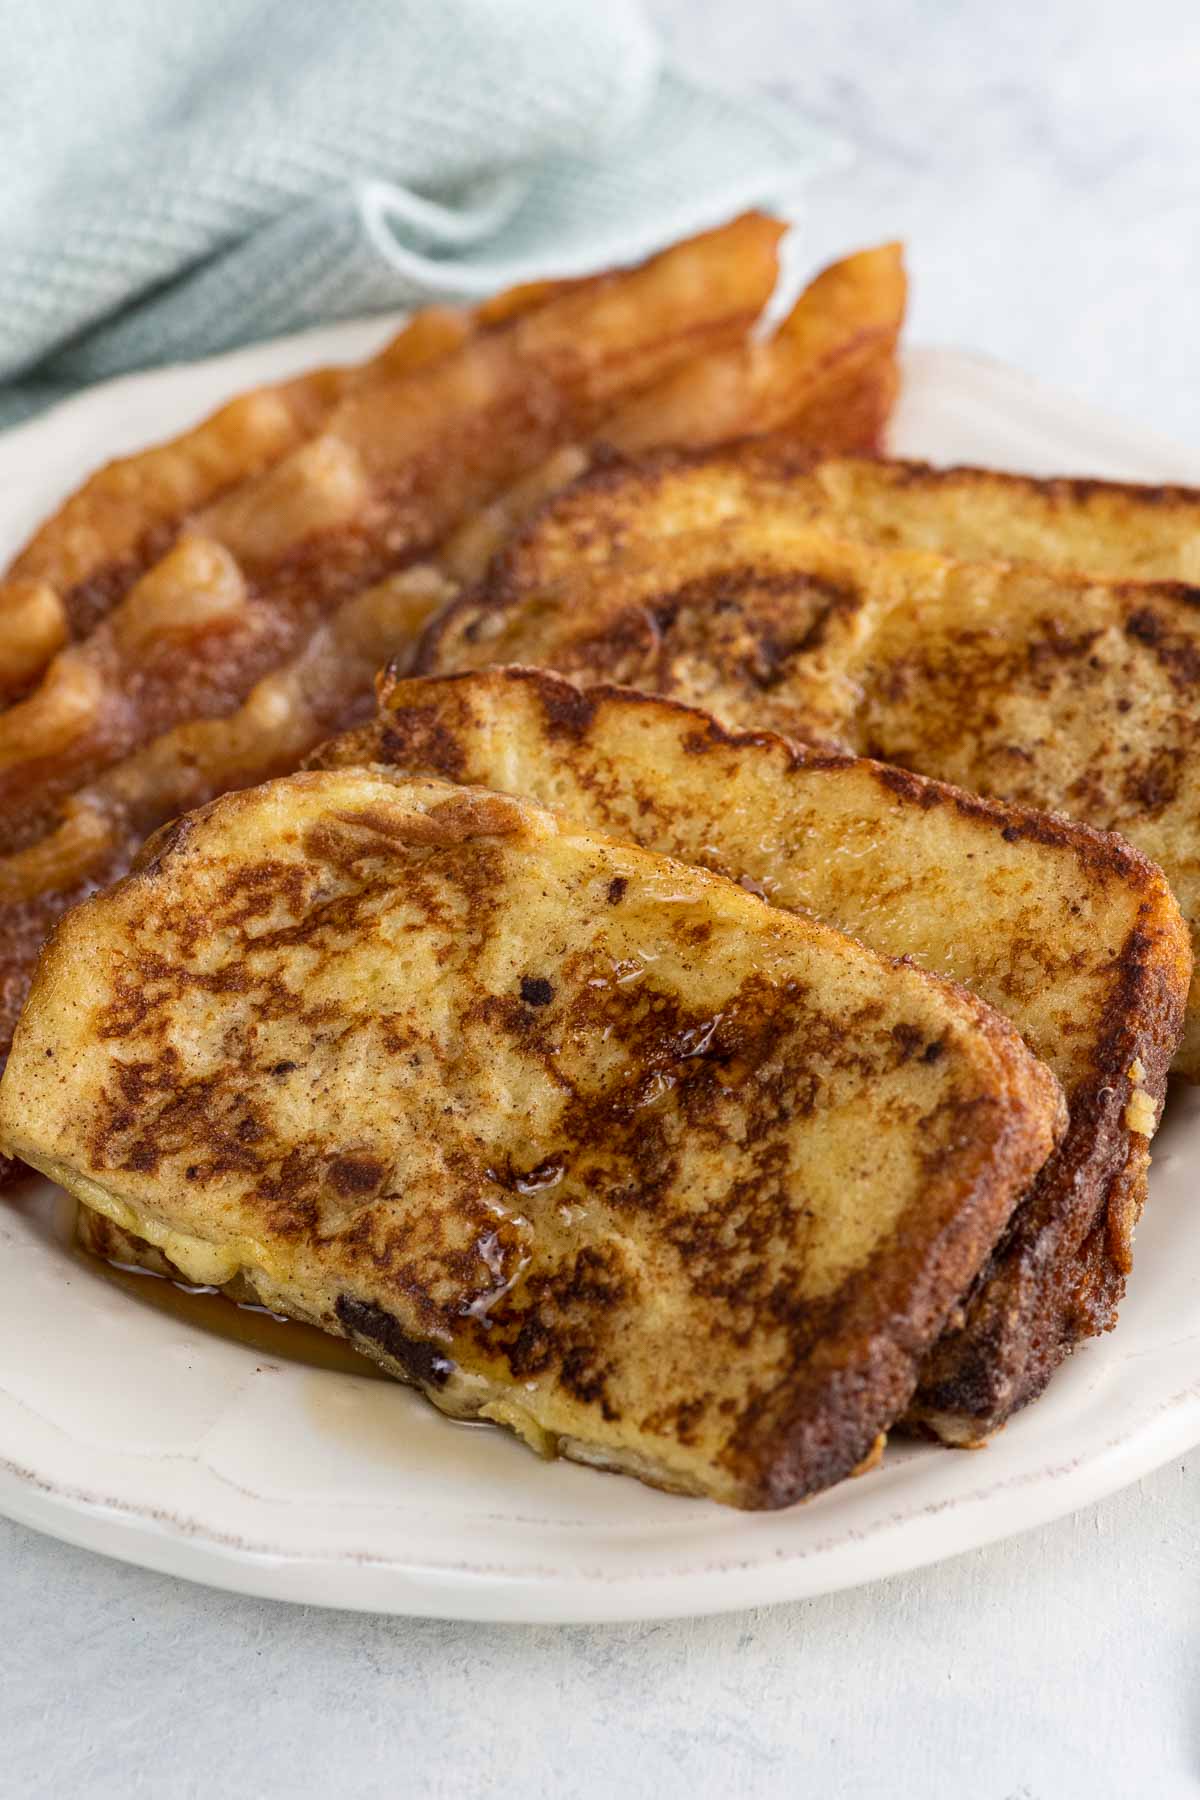 everyday french toast and bacon on a plate with a fork and napkin